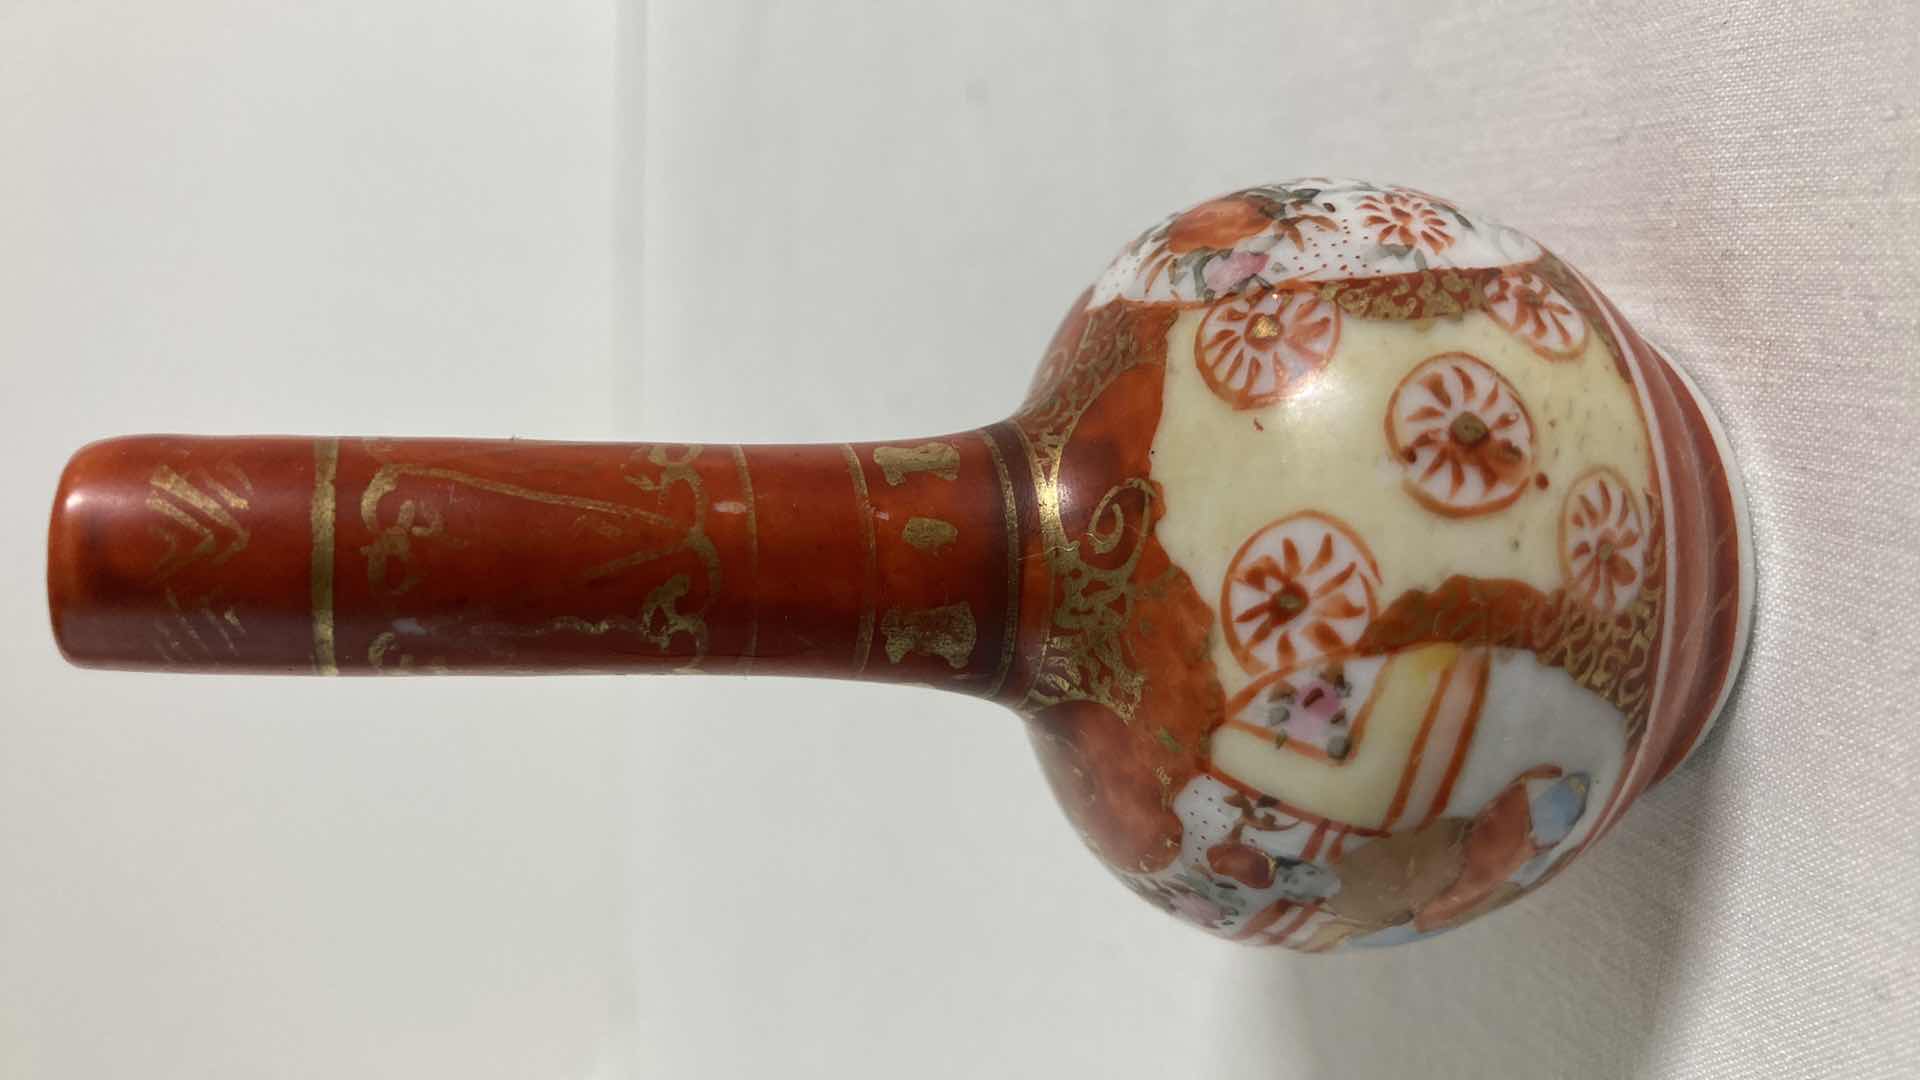 Photo 4 of EARLY CENTURY JAPANESE MINIATURE HAND PAINTED PORCELAIN VASE SIGNED BY ARTIST 1.75” X 3.5”